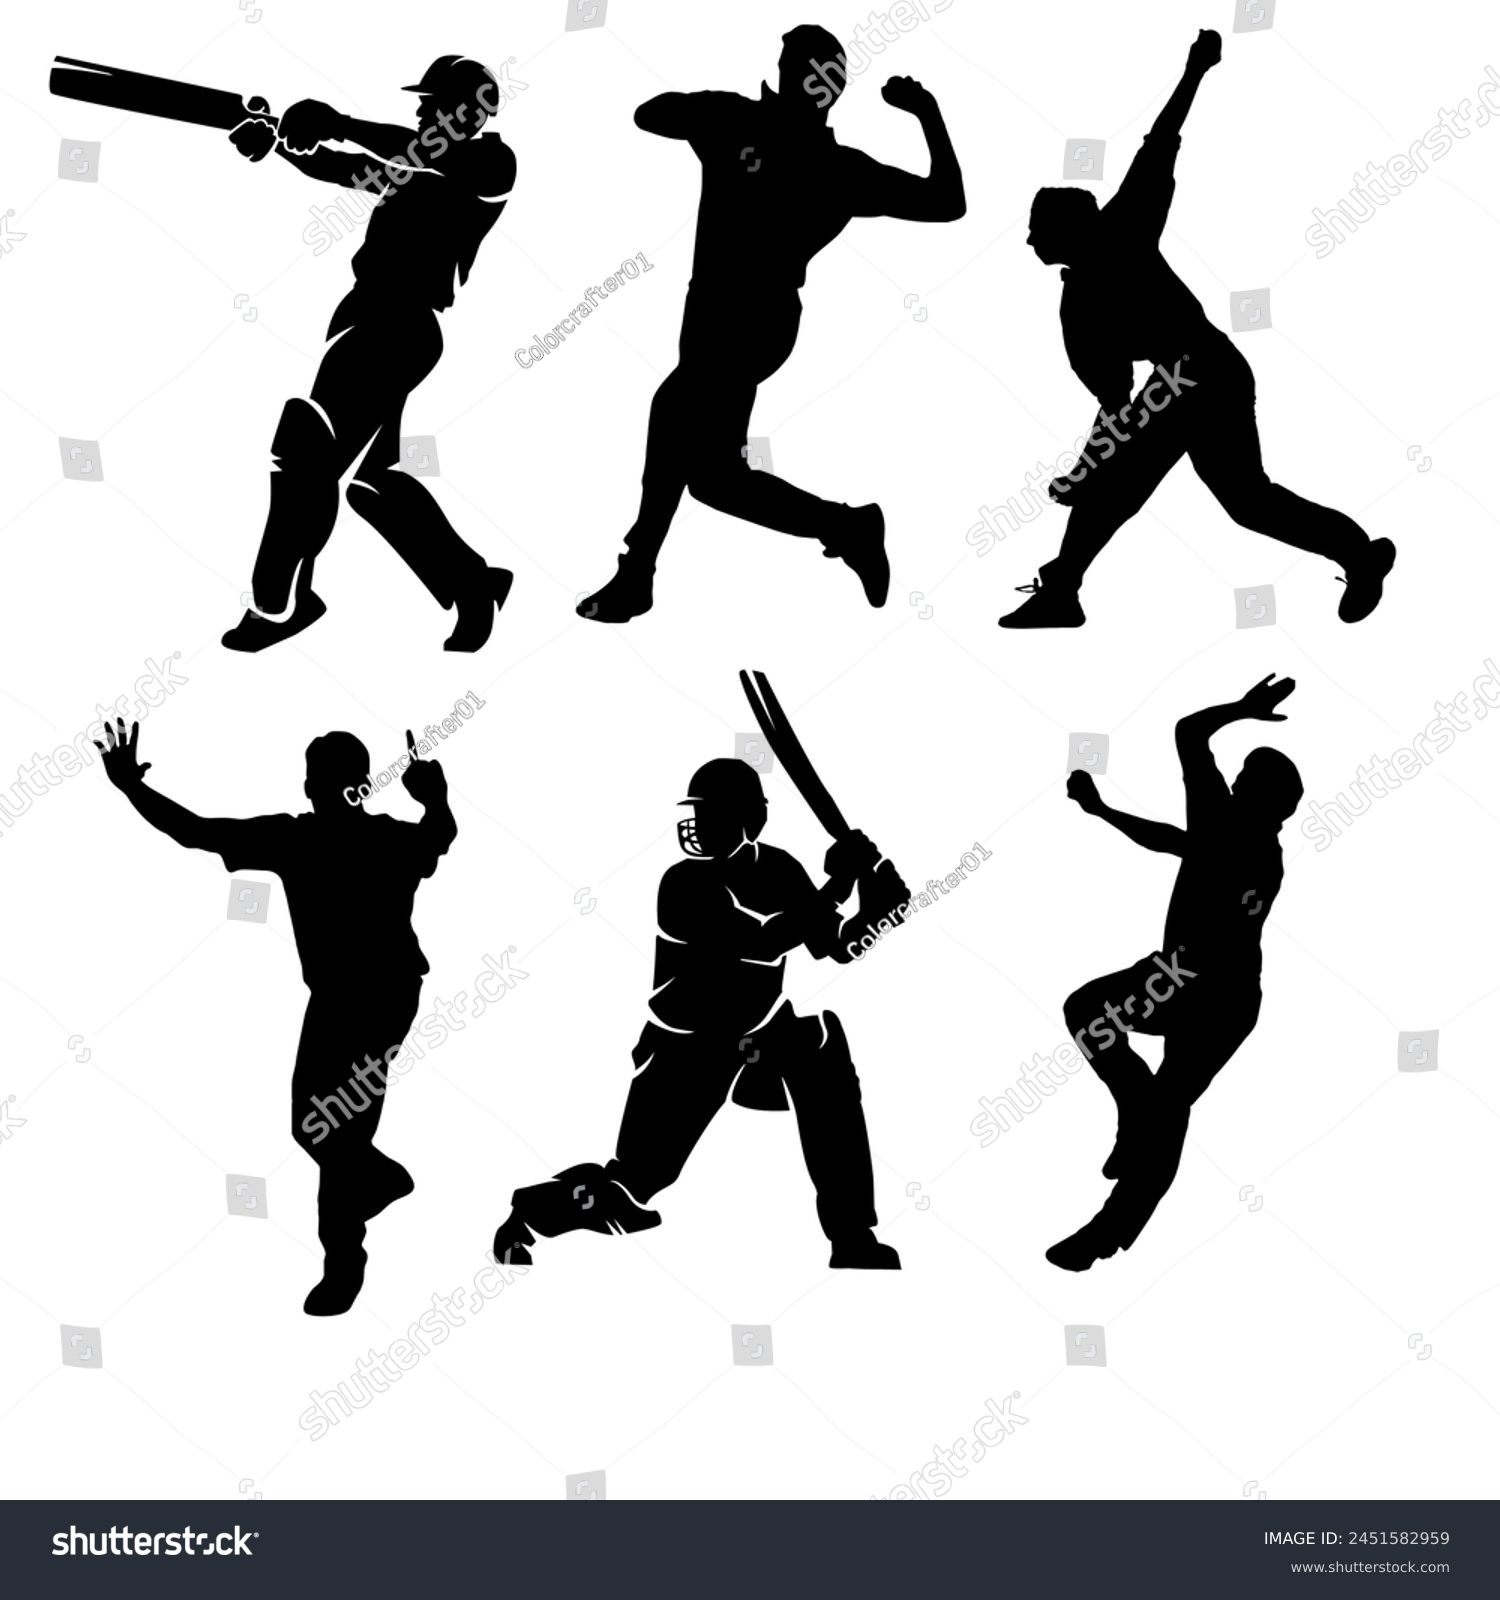 SVG of Extensive collection of cricket player silhouettes, including batsmen, bowlers, and cricket-related elements svg